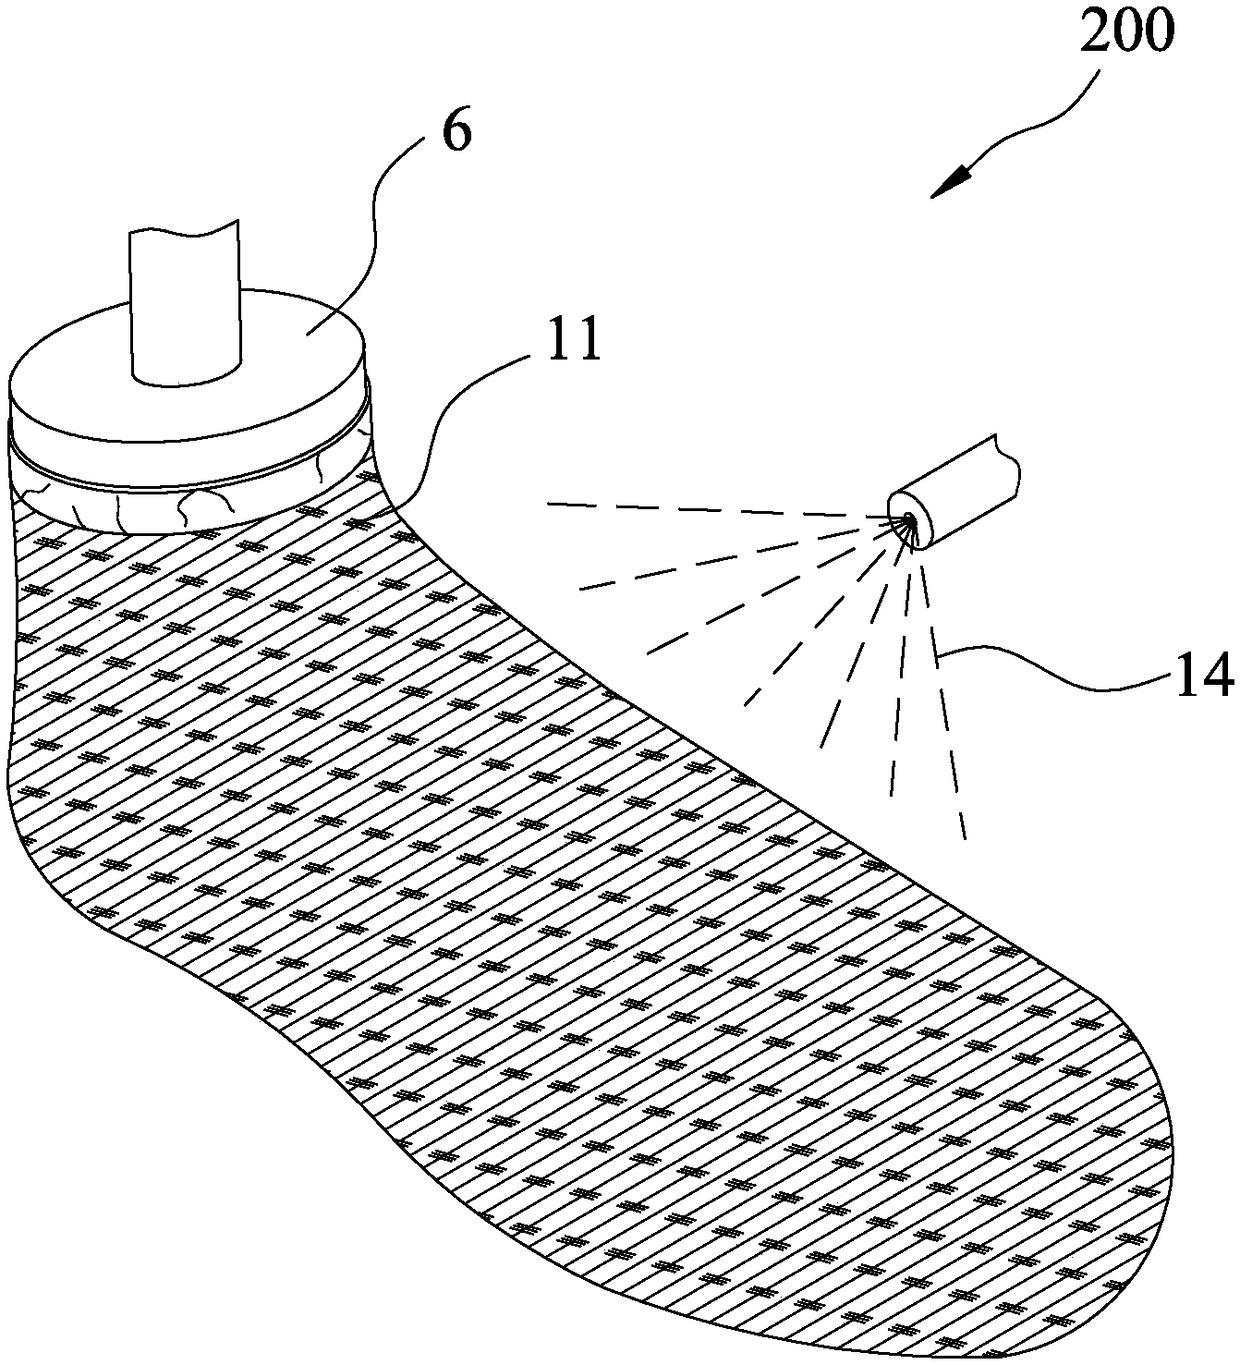 Manufacturing method of stereoscopic sock shoe with stiffness